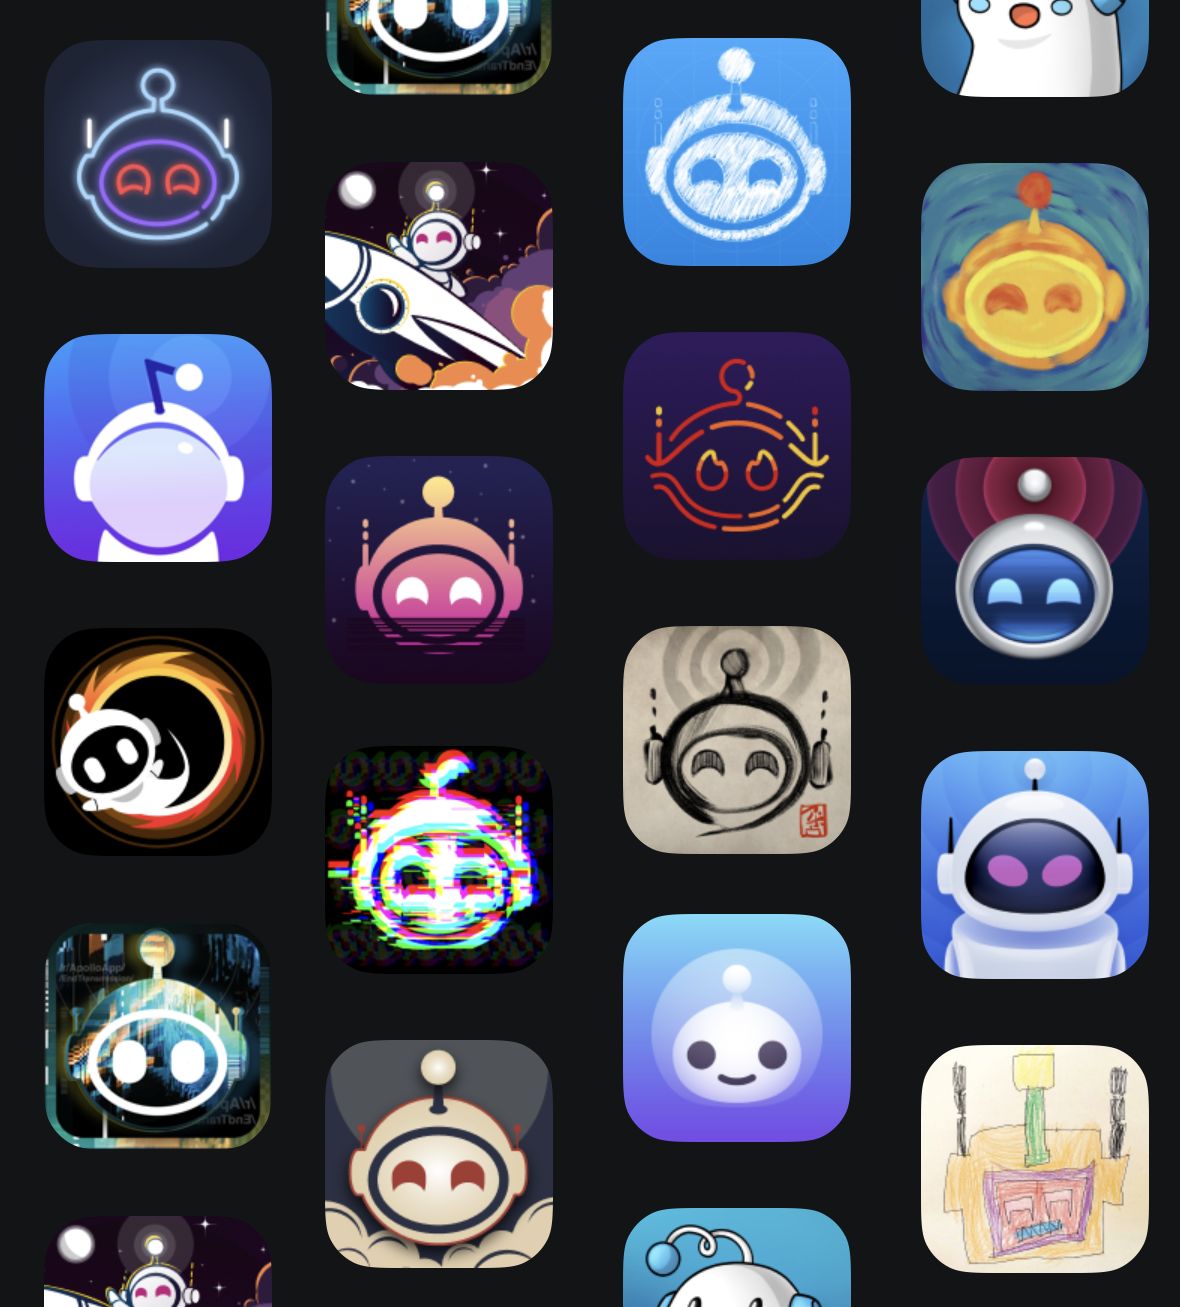 Screenshot of the community app icon variations from inside the “Apollo” app.